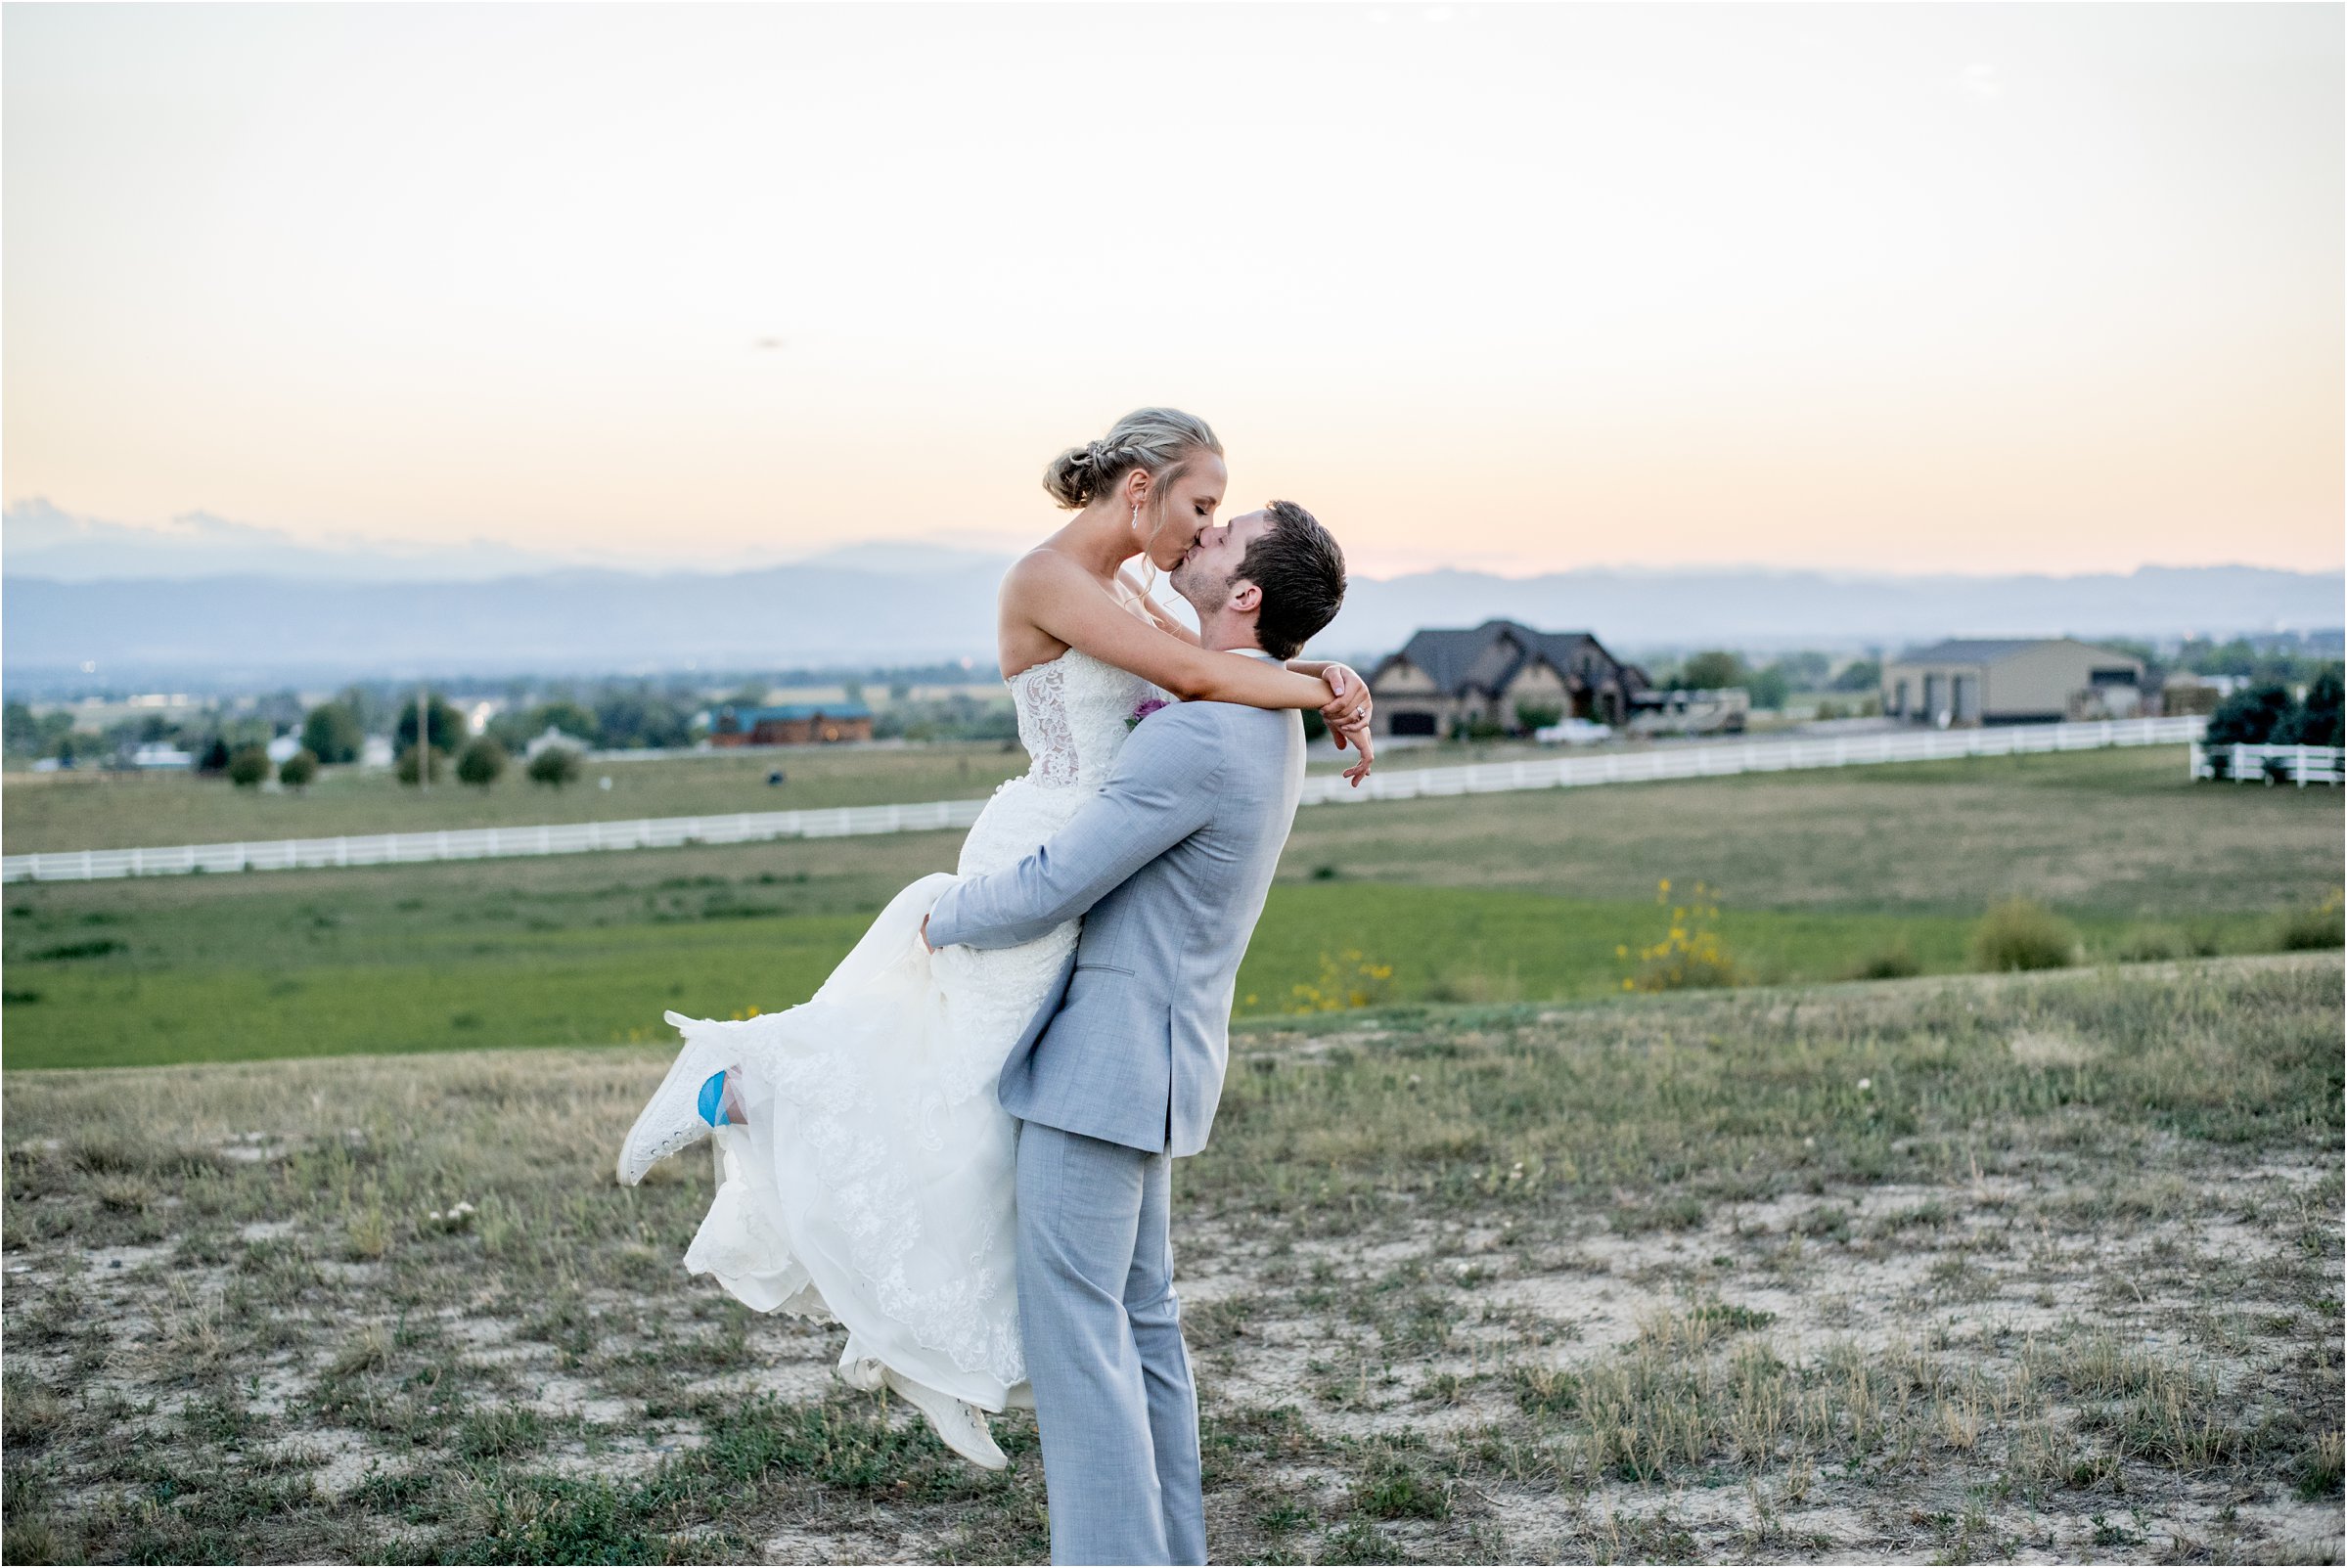 groom lifting bride up in the the air for a kiss with a mountain range in the background